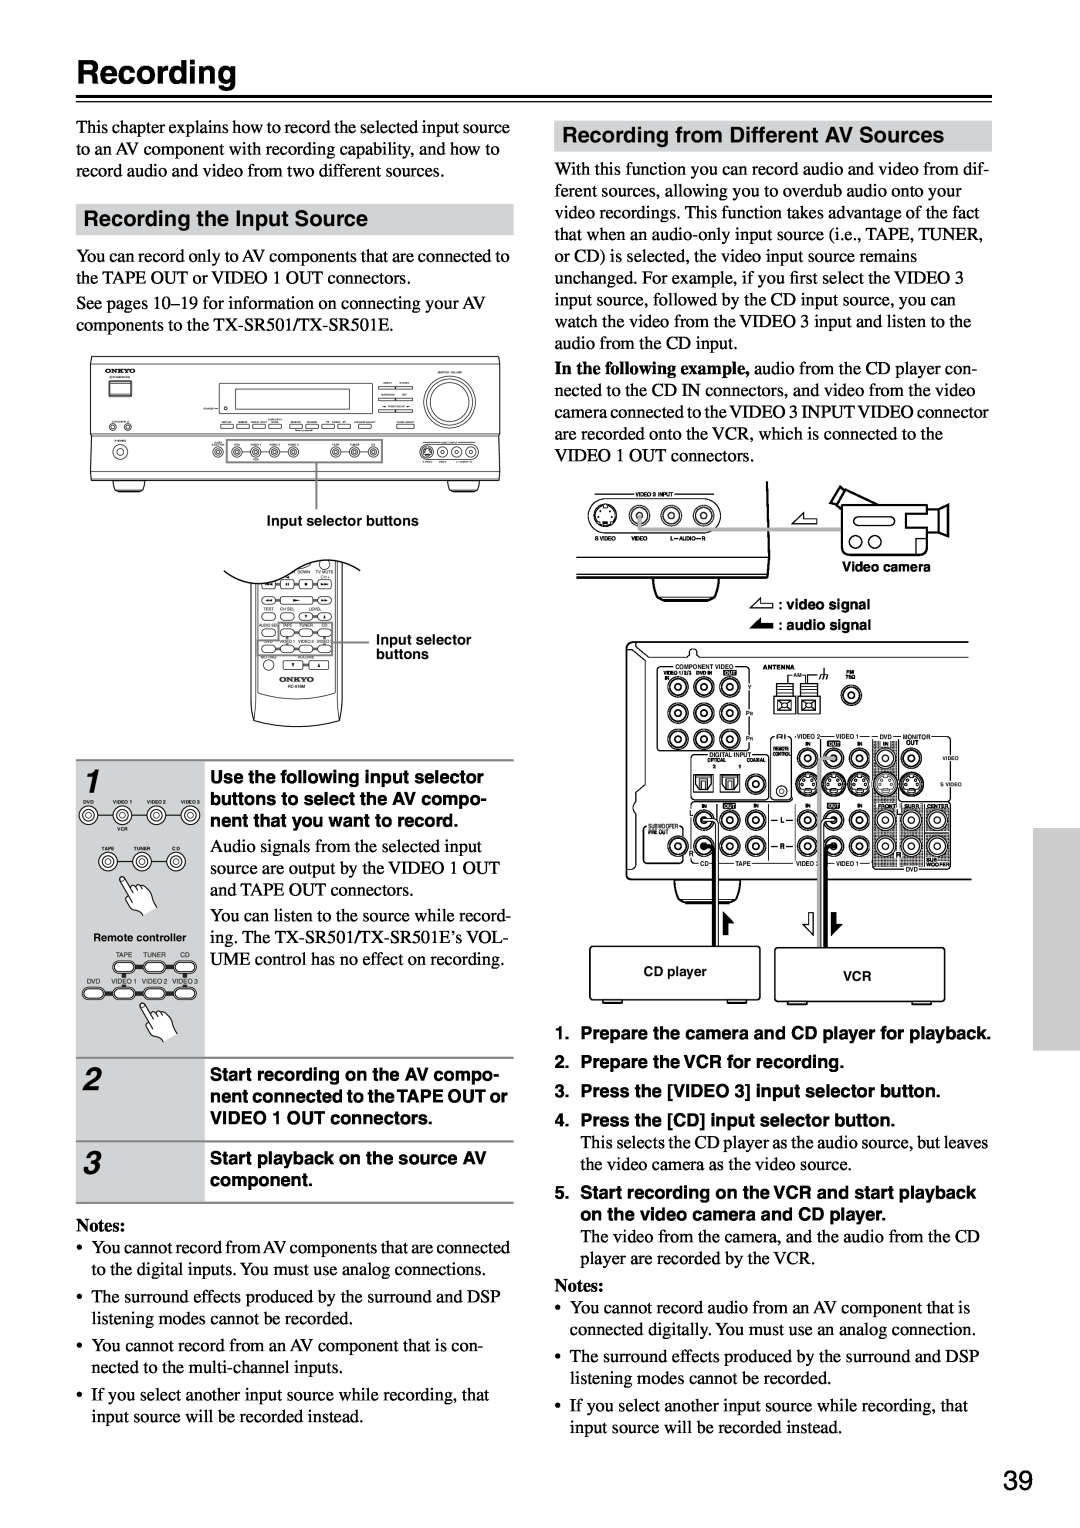 Onkyo TX-SR501E instruction manual Recording the Input Source, Recording from Different AV Sources 